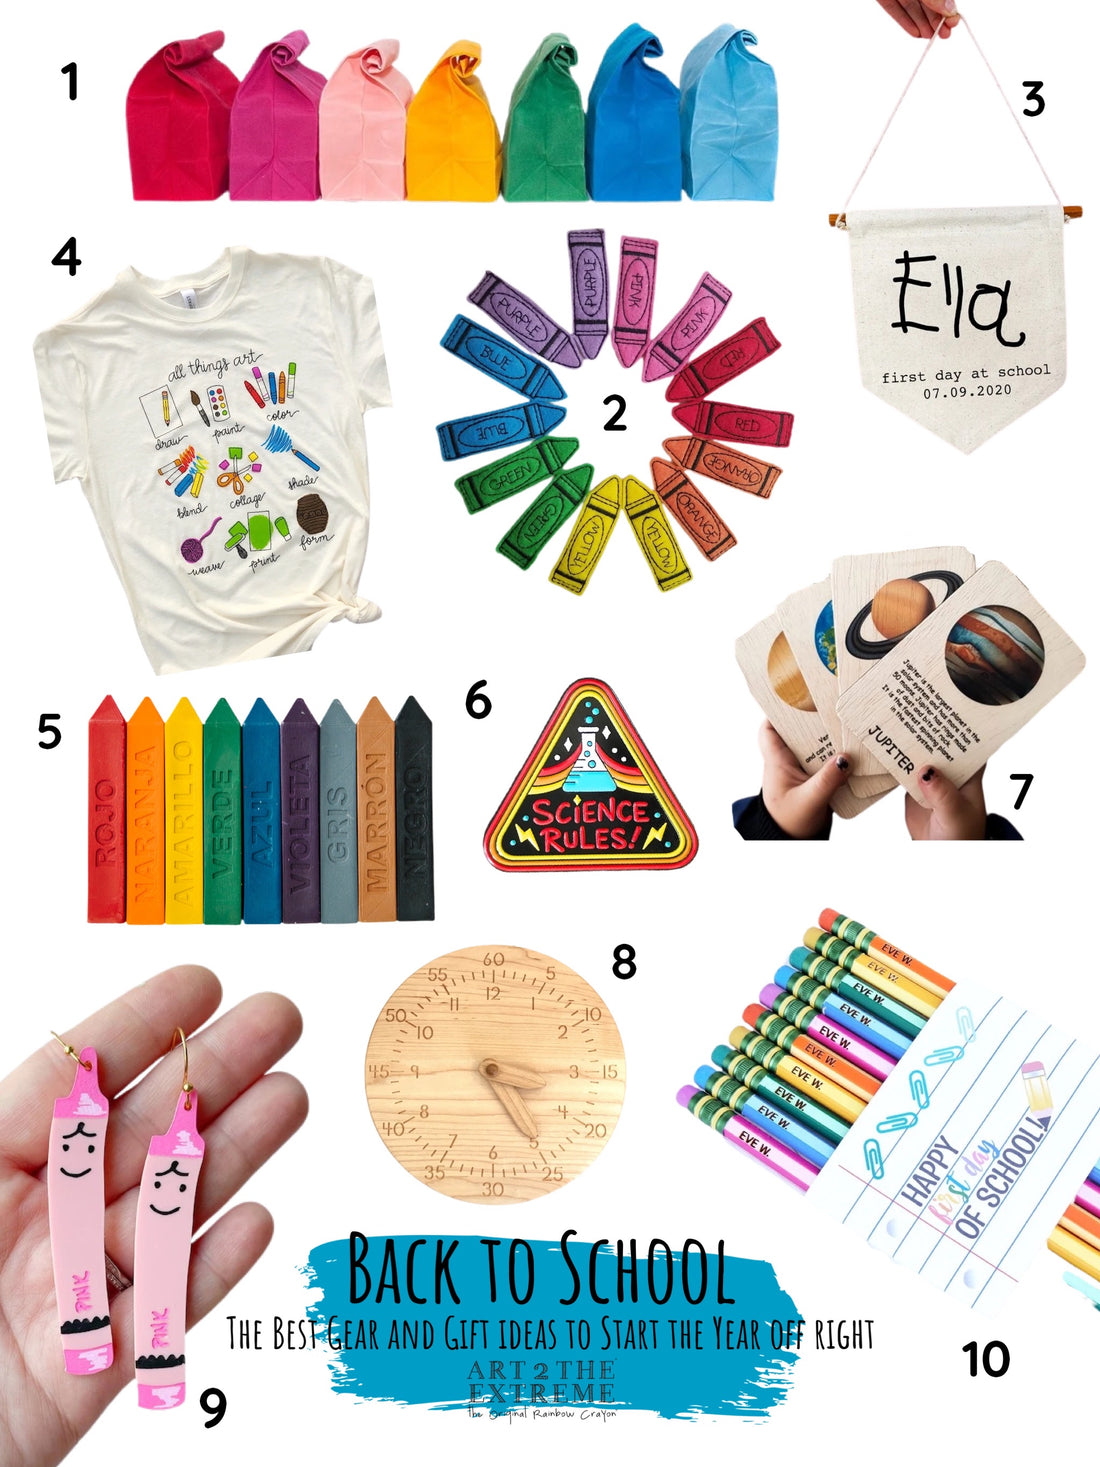 Back To School Gifts For Kids: Best Gifts For The First Day – Art 2 the  Extreme® - The Original Rainbow Crayon®